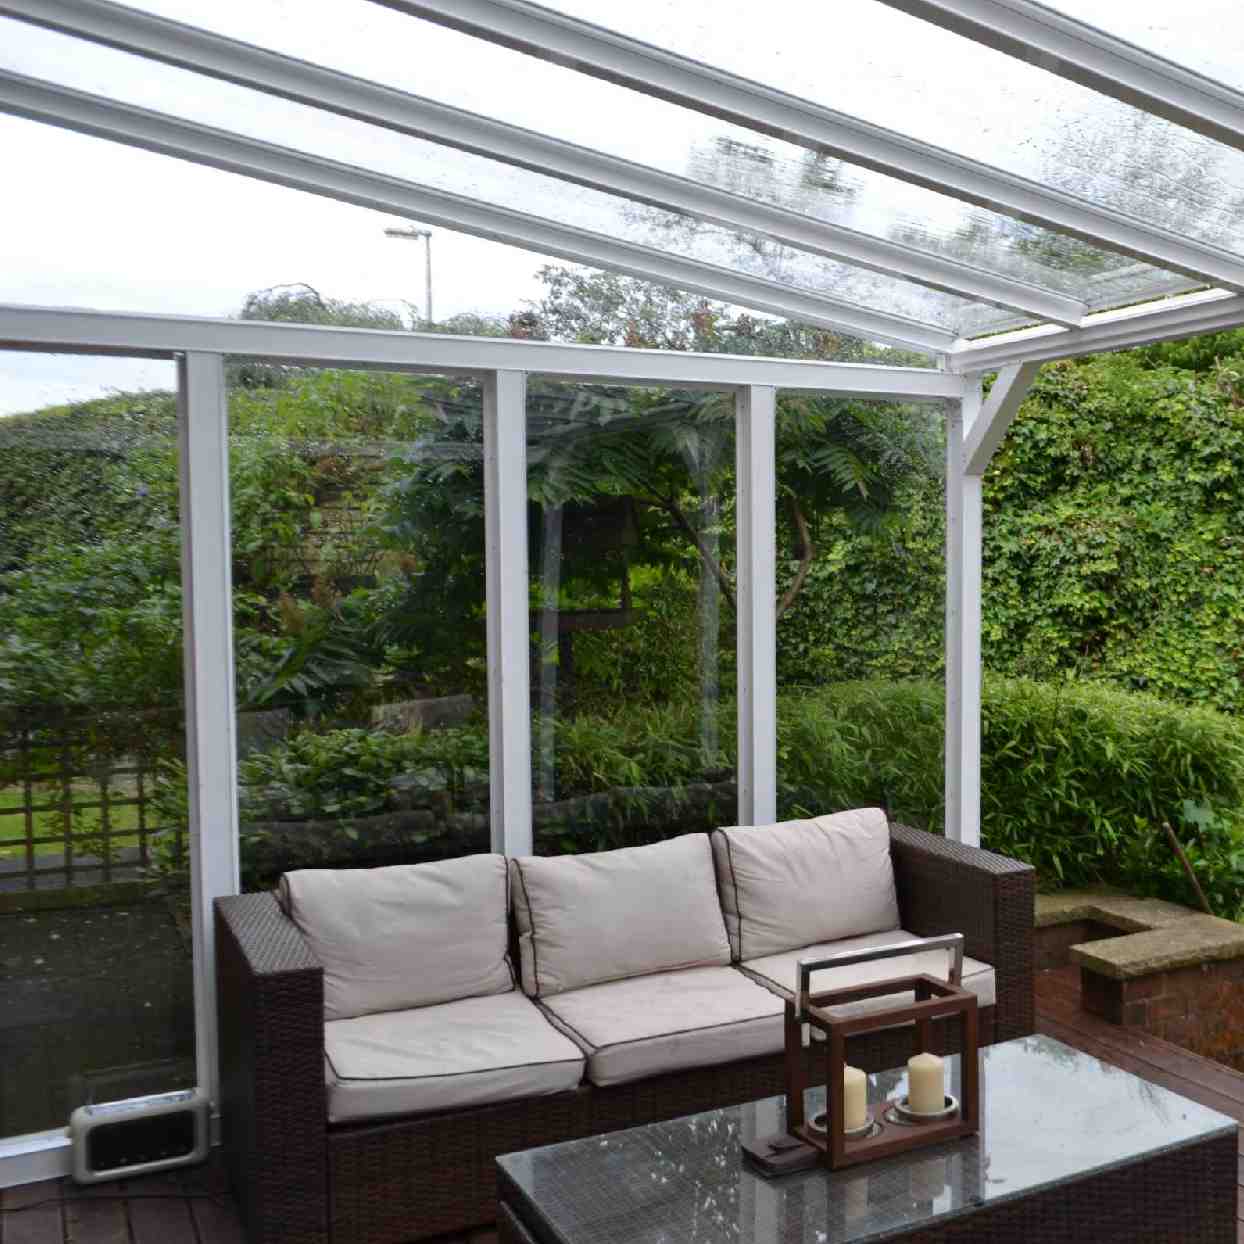 Buy Omega Verandah White with 16mm Polycarbonate Glazing - 2.1m (W) x 1.5m (P), (2) Supporting Posts online today